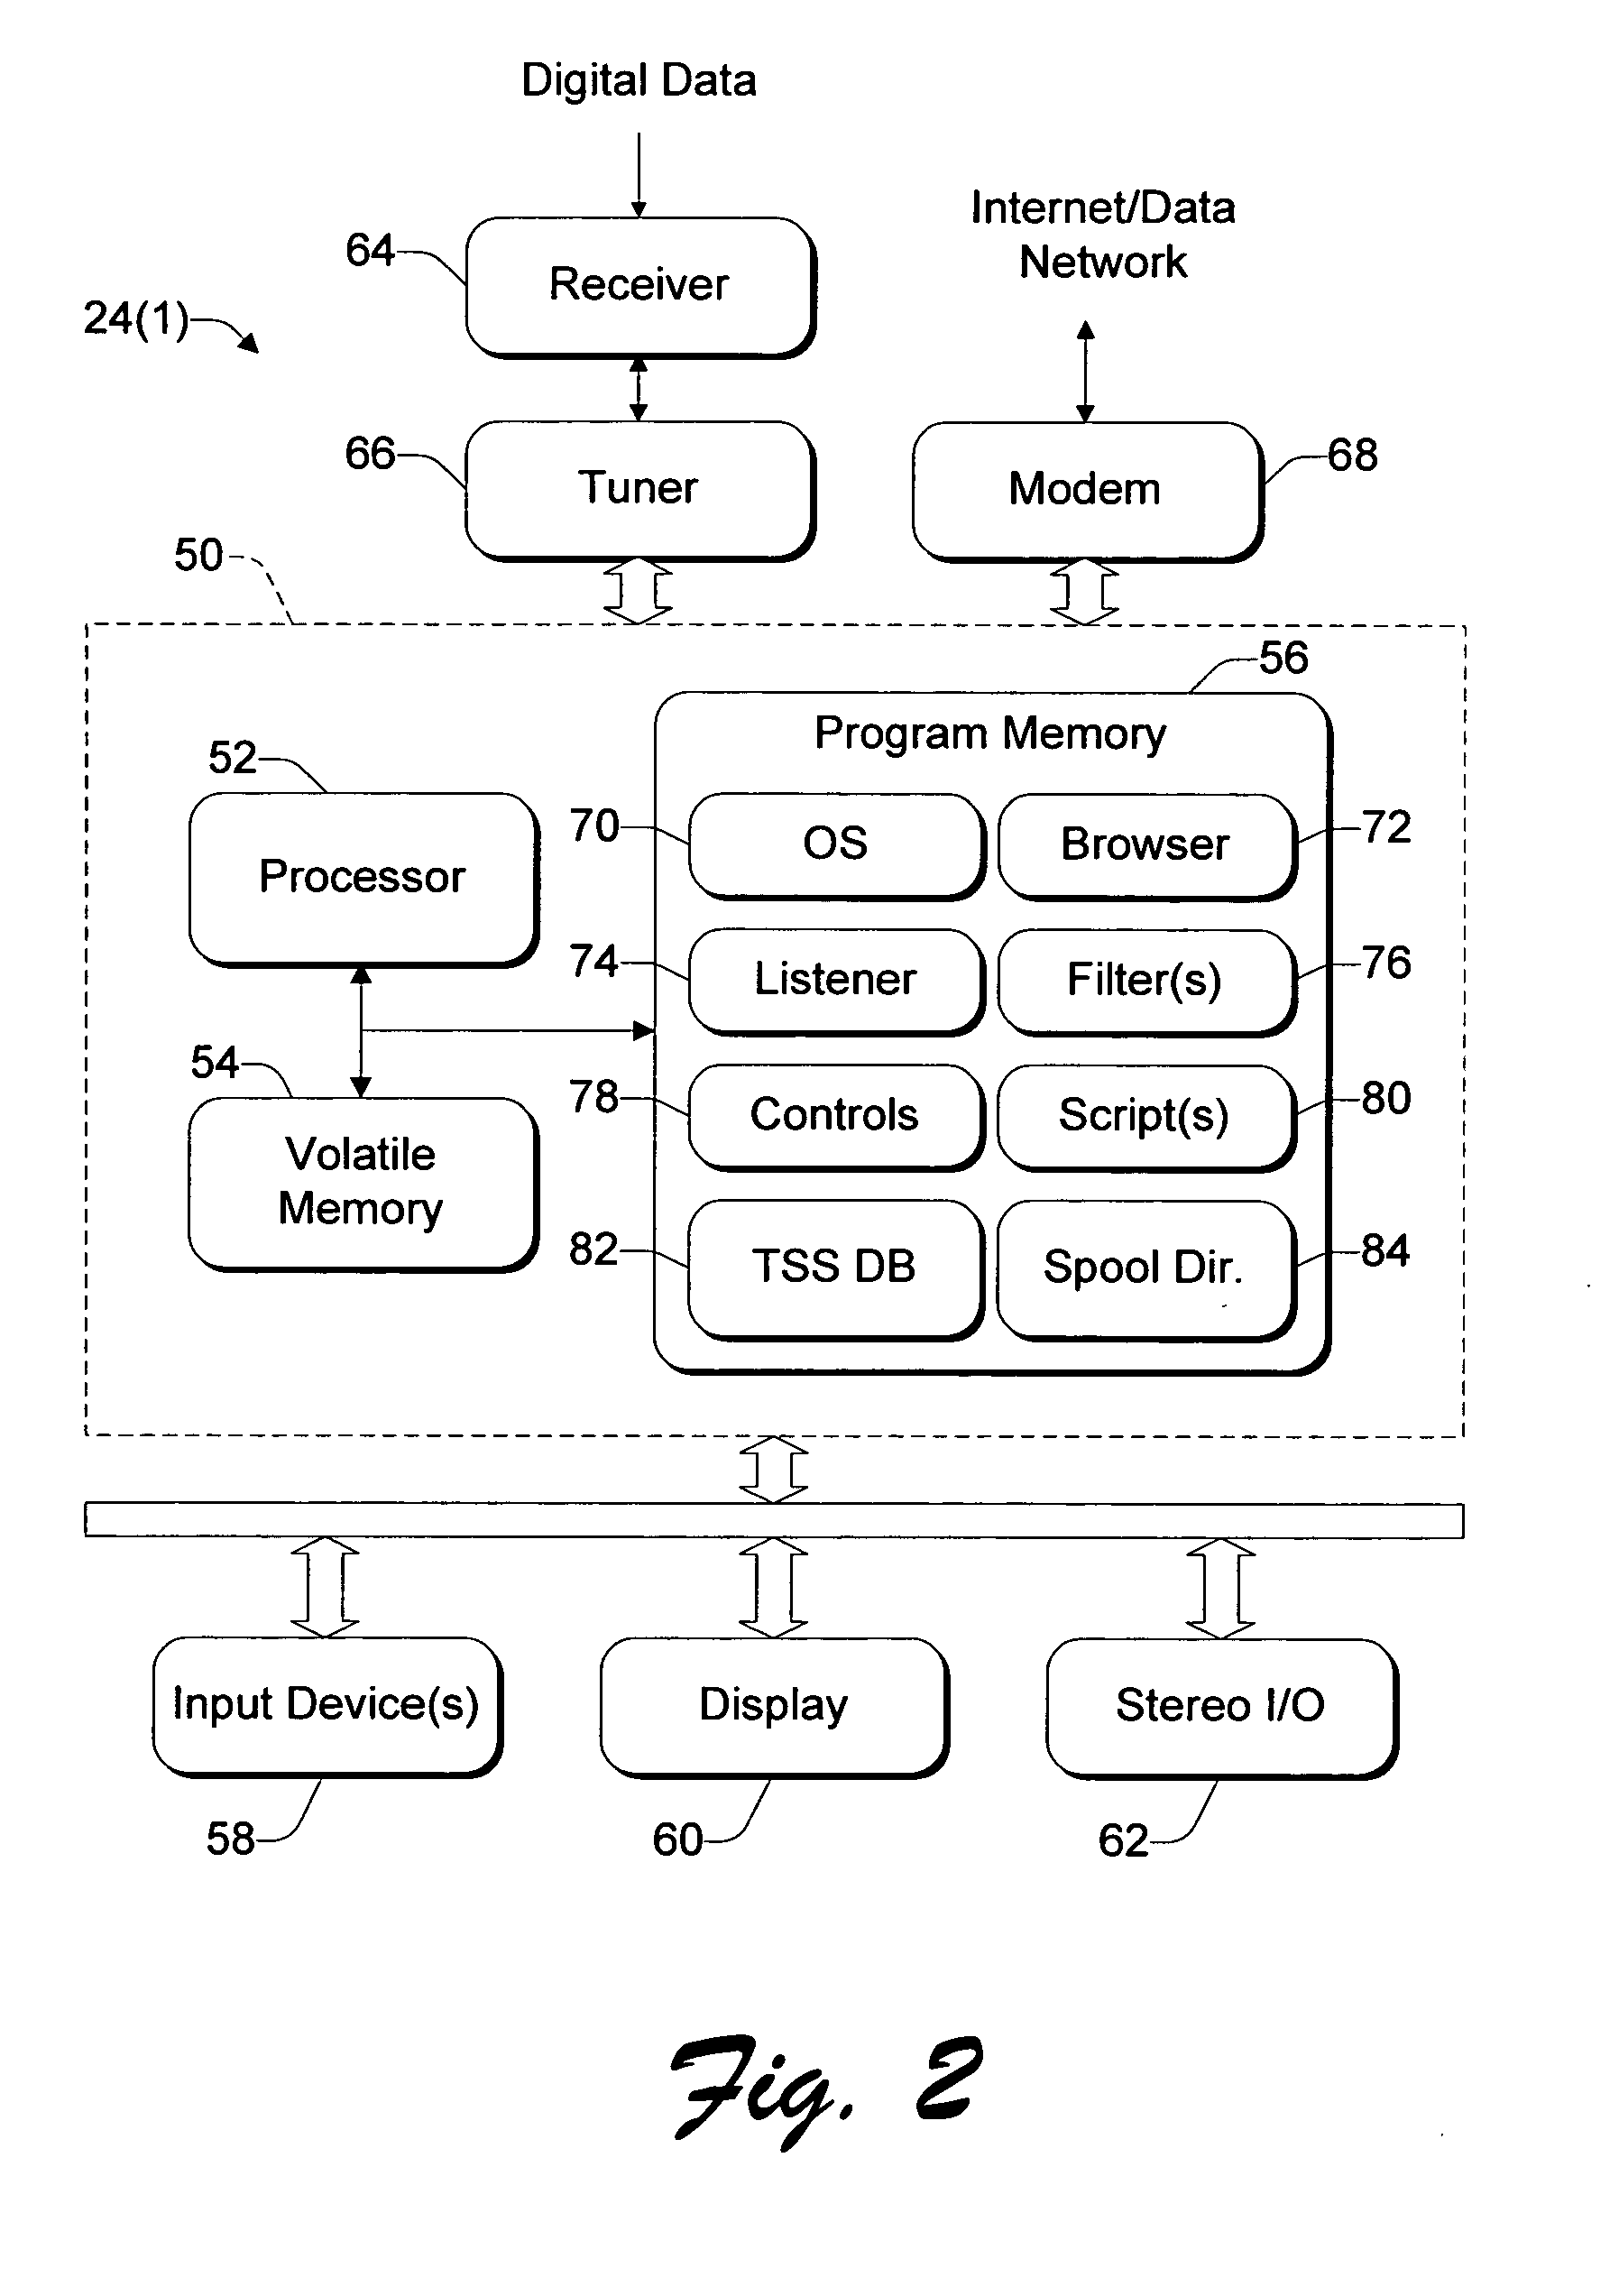 System and method for synchronizing streaming content with enhancing content using pre-announced triggers